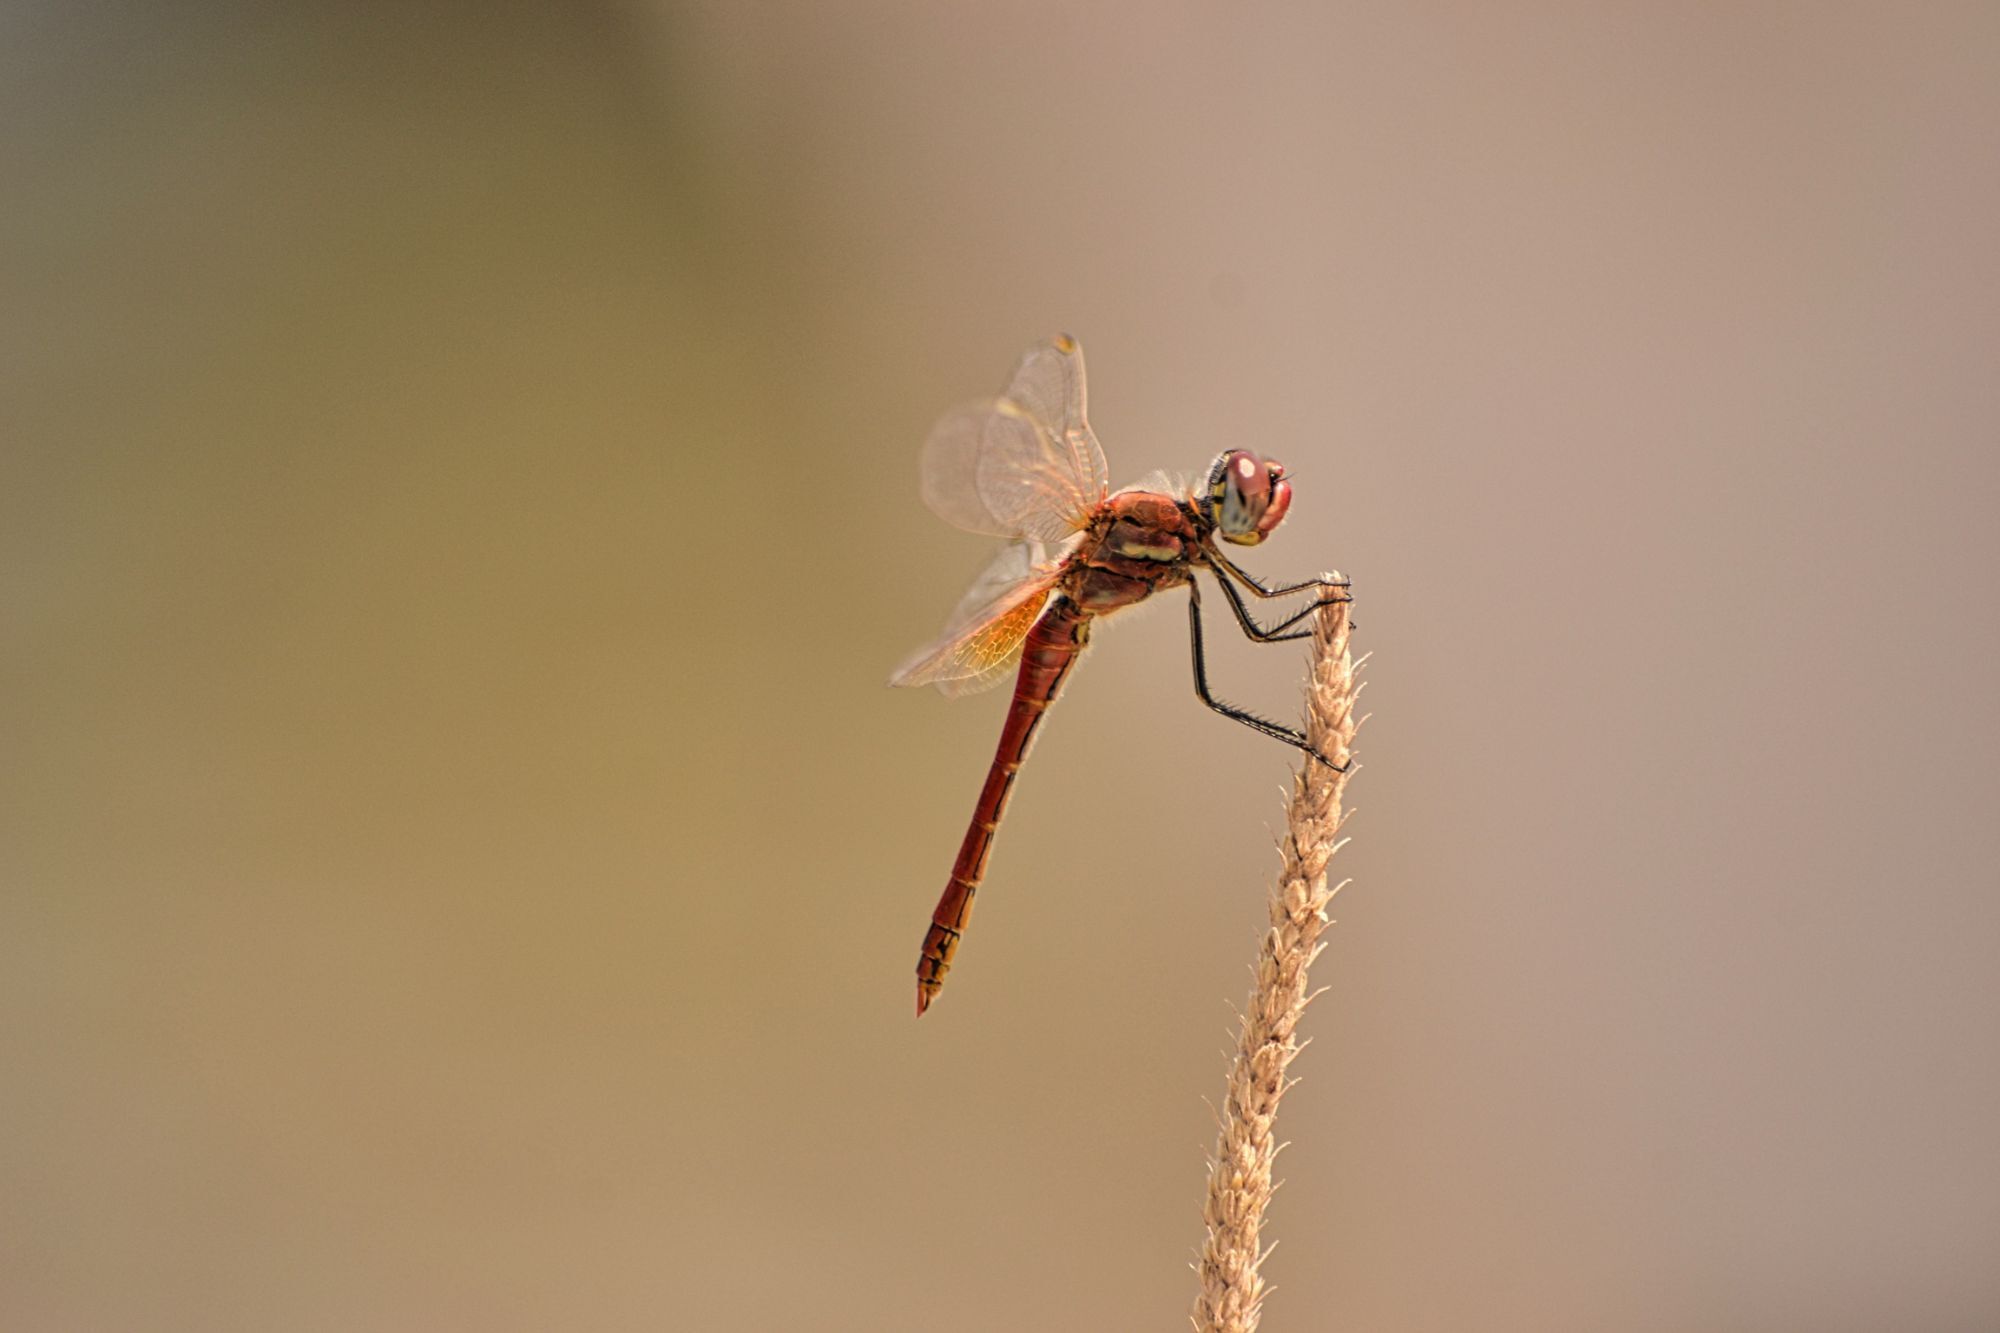 Dragonfly photography by Brecht De Ruyte